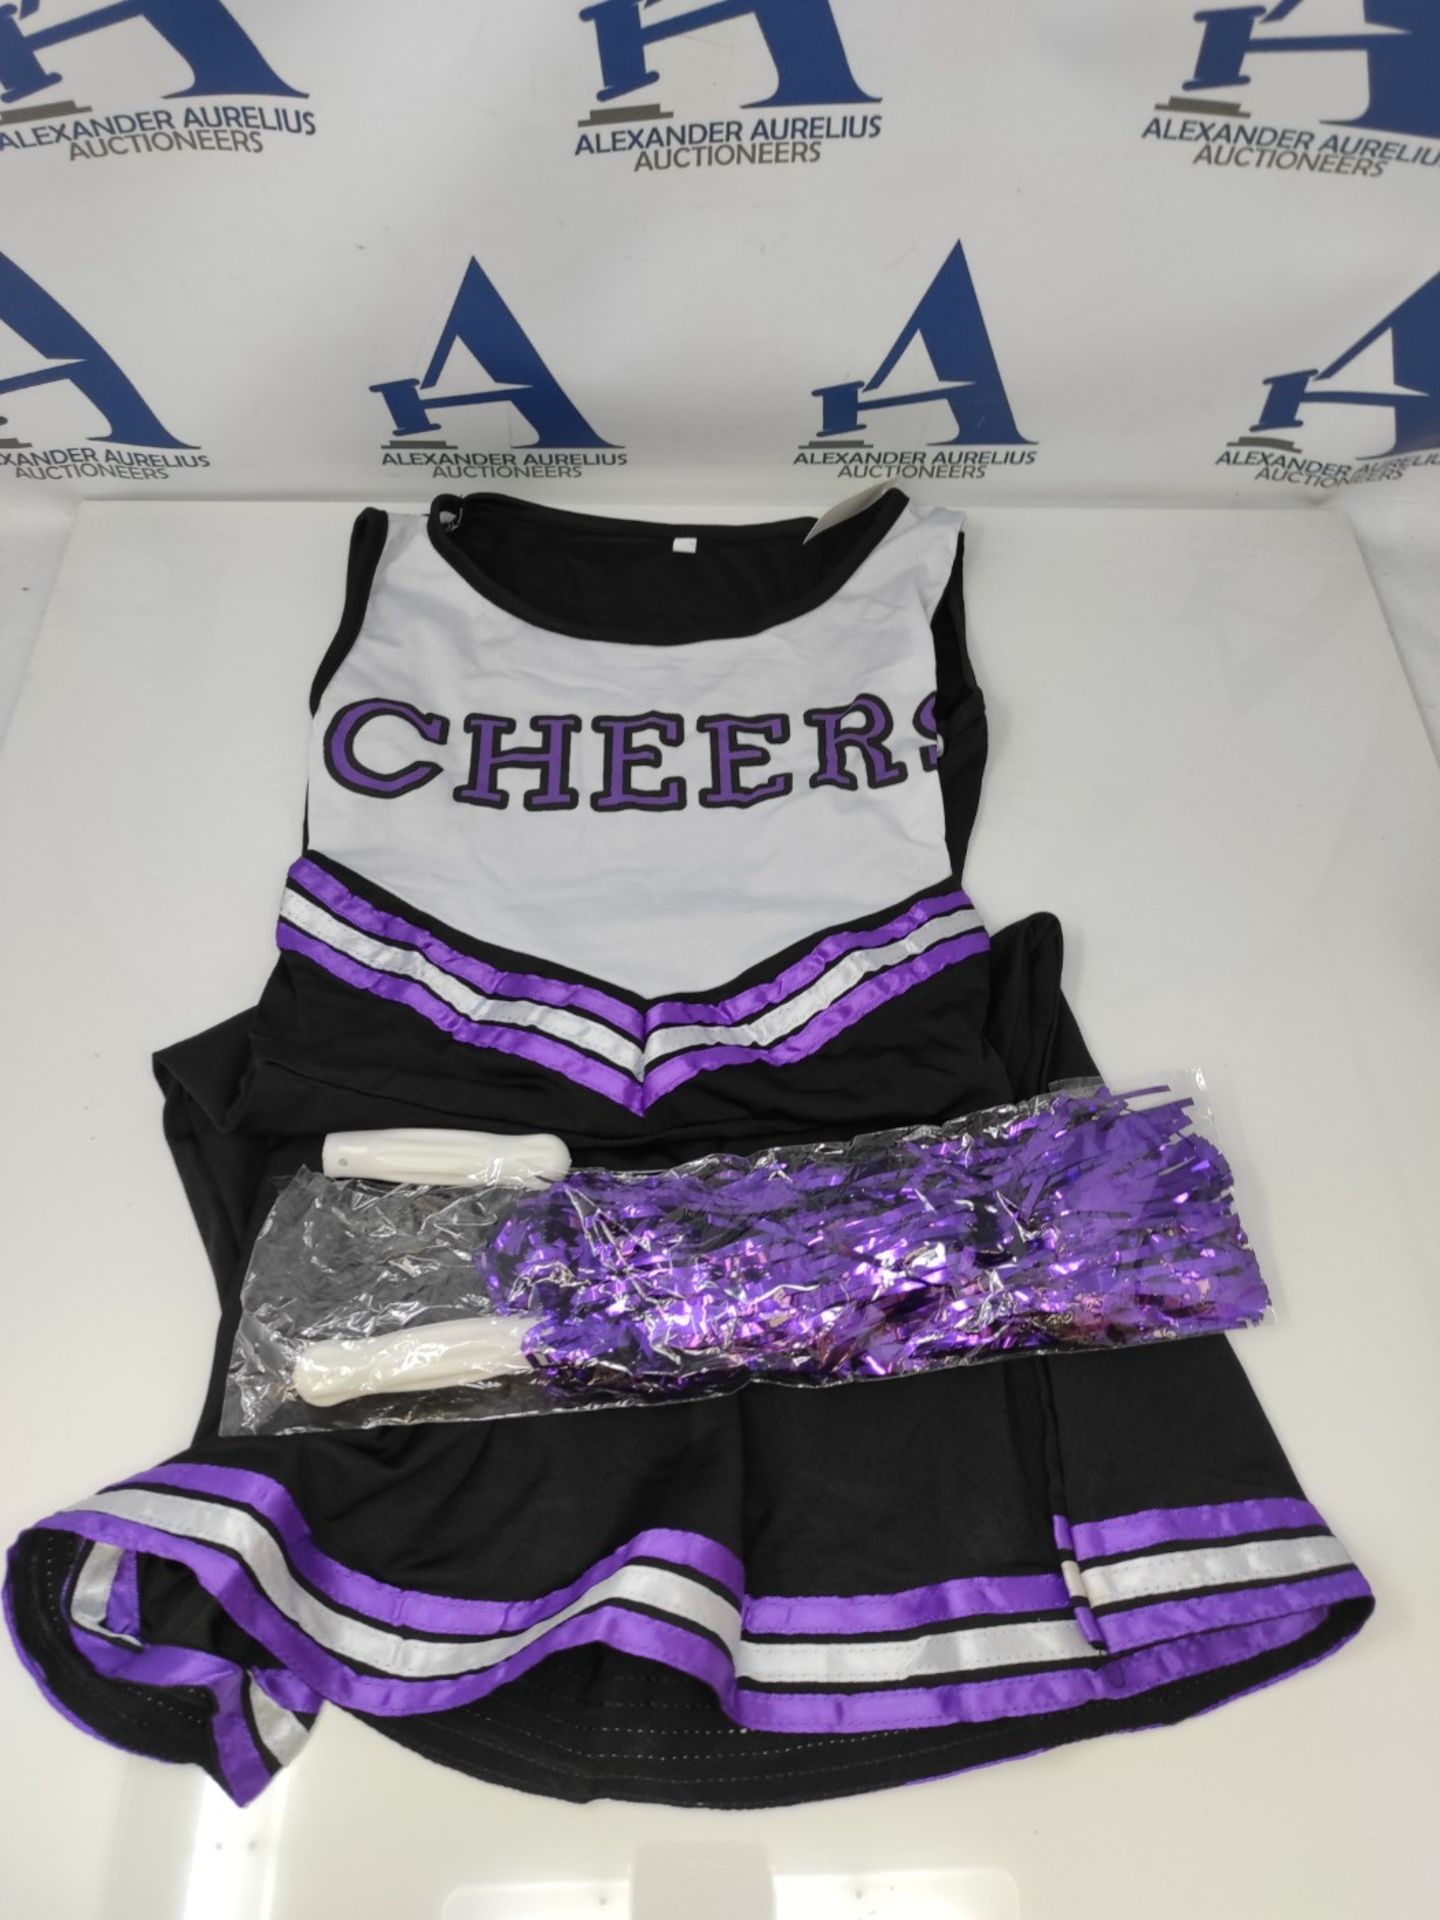 Cheerleader costume, costume from "High School Musical" with pompoms, available in 6 c